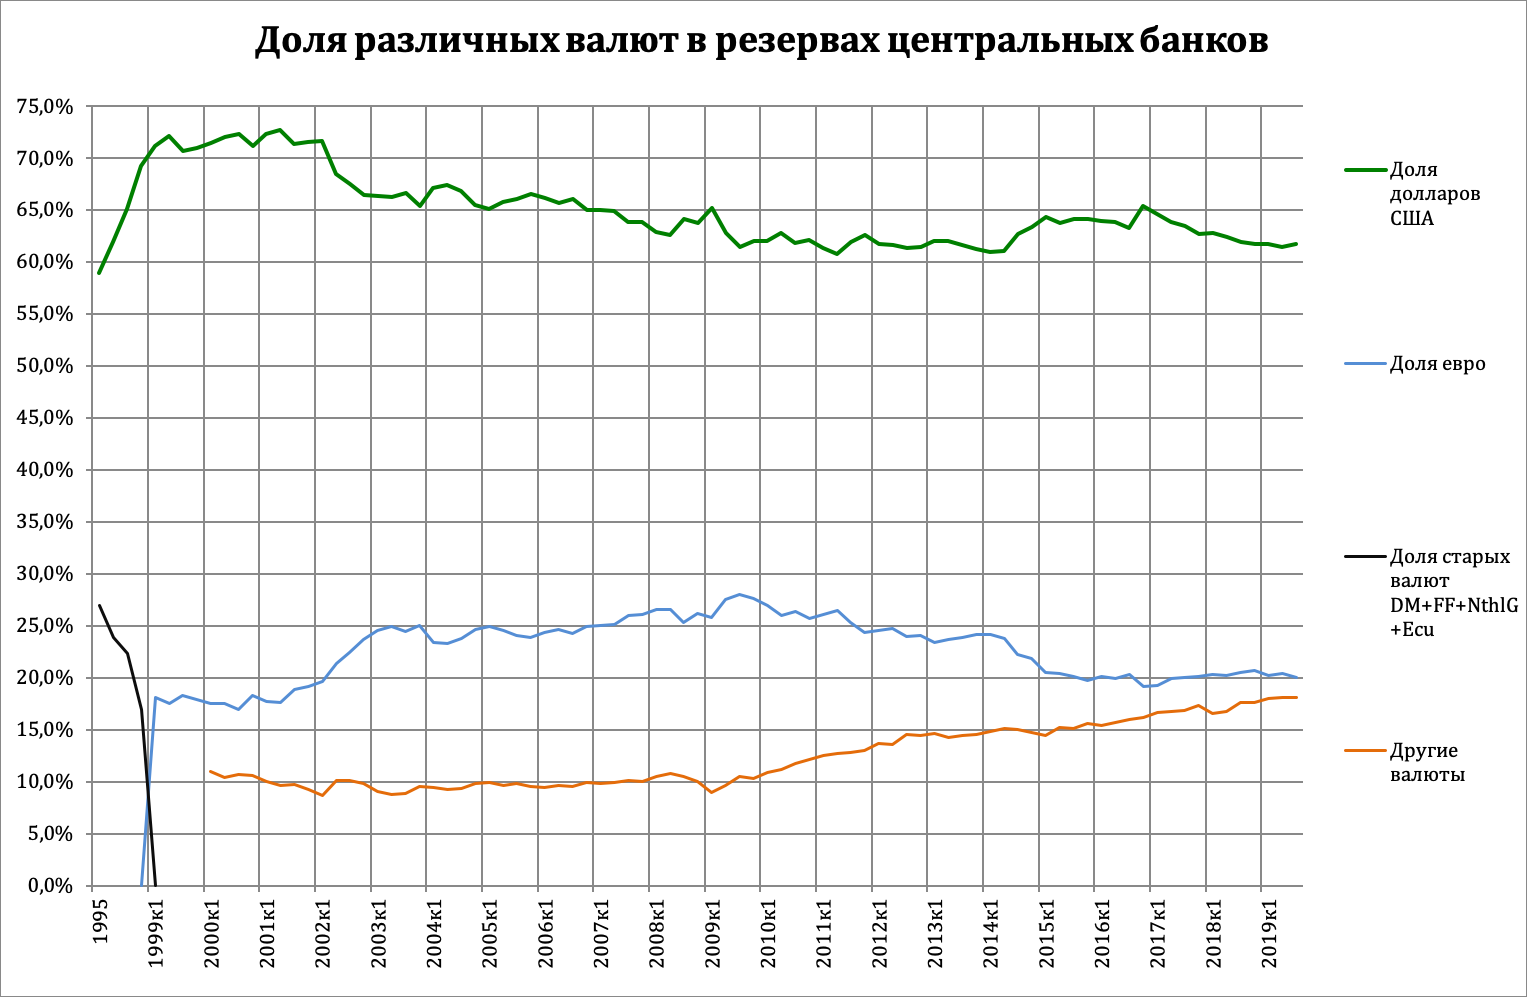 Share of different currencies in central bank reserves - рус.png